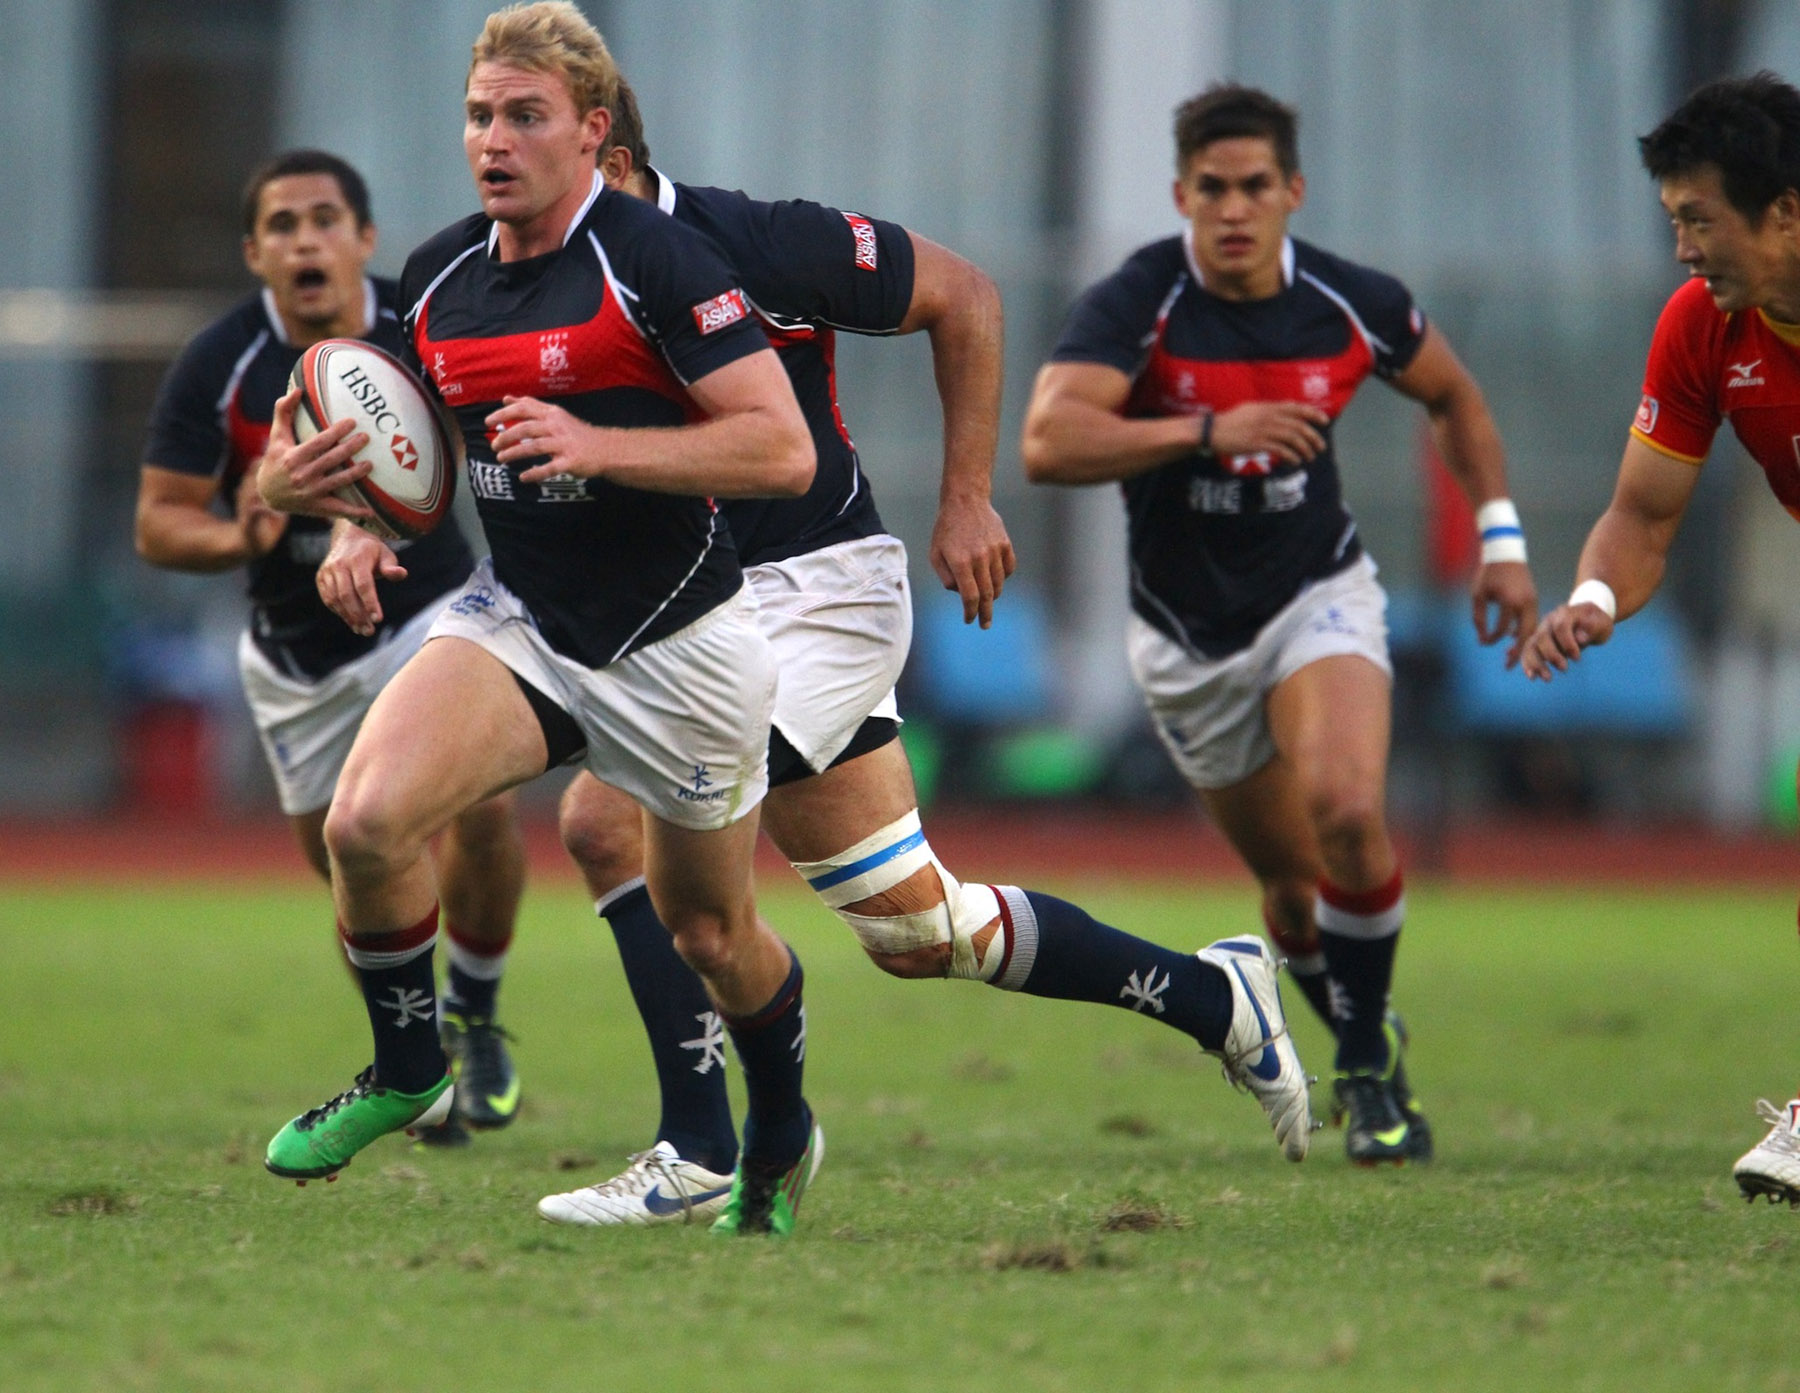 Men's sevens rugby ranks as one of the biggest success stories for the Hong Kong Rugby Football Union. Photo: HKRFU